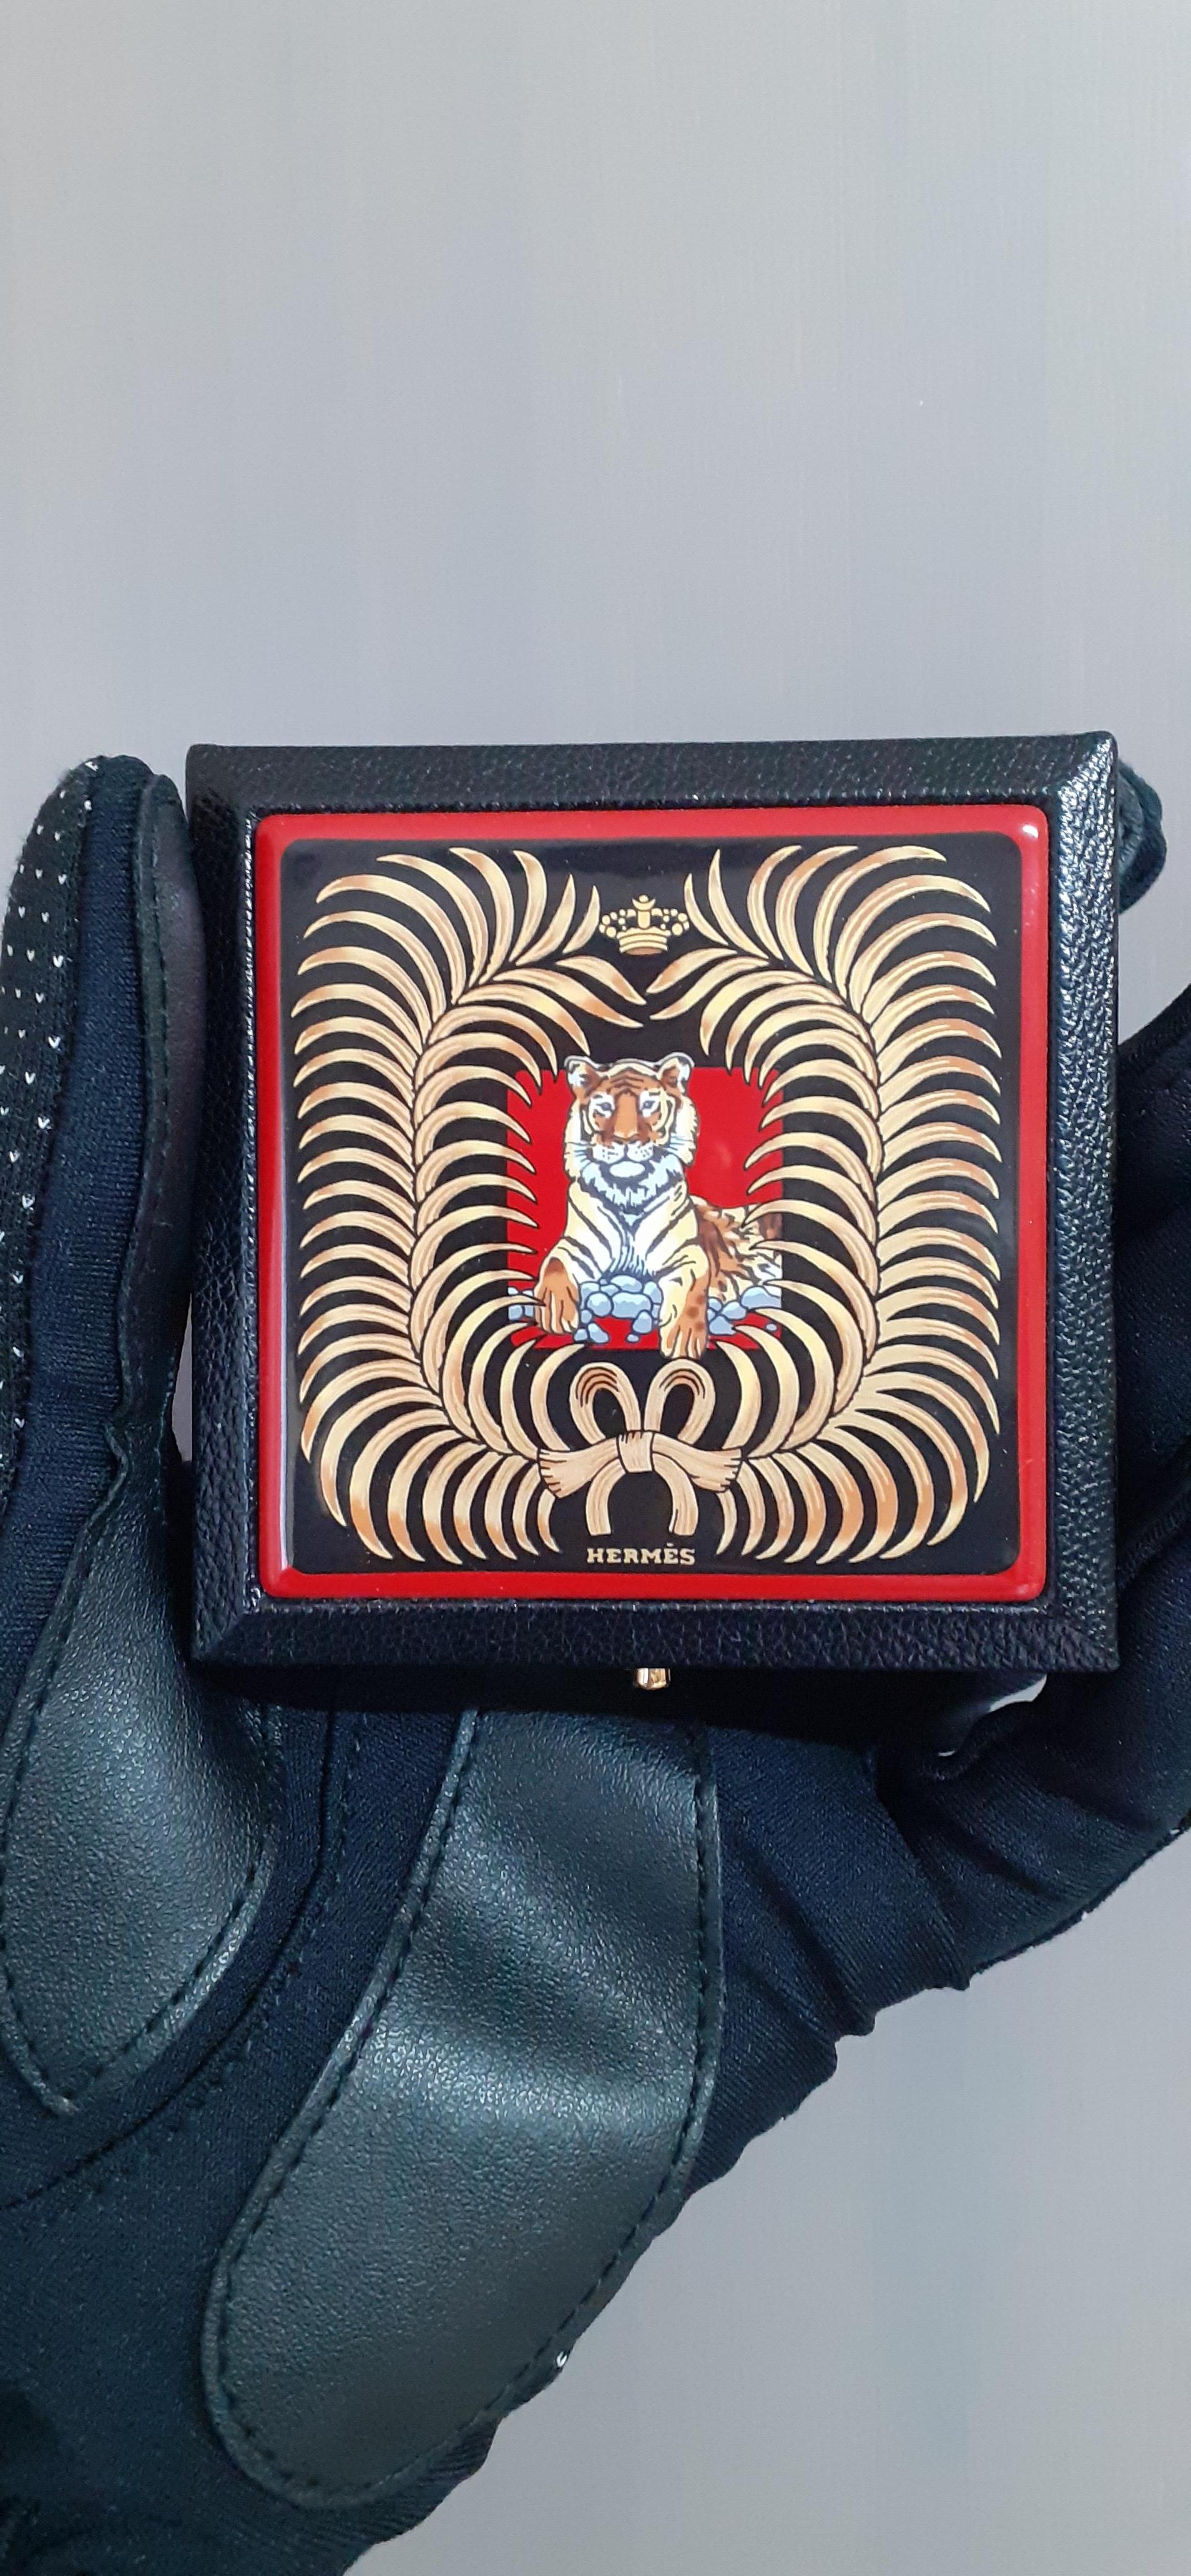 Exceptional Hermès Enamel and Leather Powder Compact Tigre Royal Print RARE For Sale 7